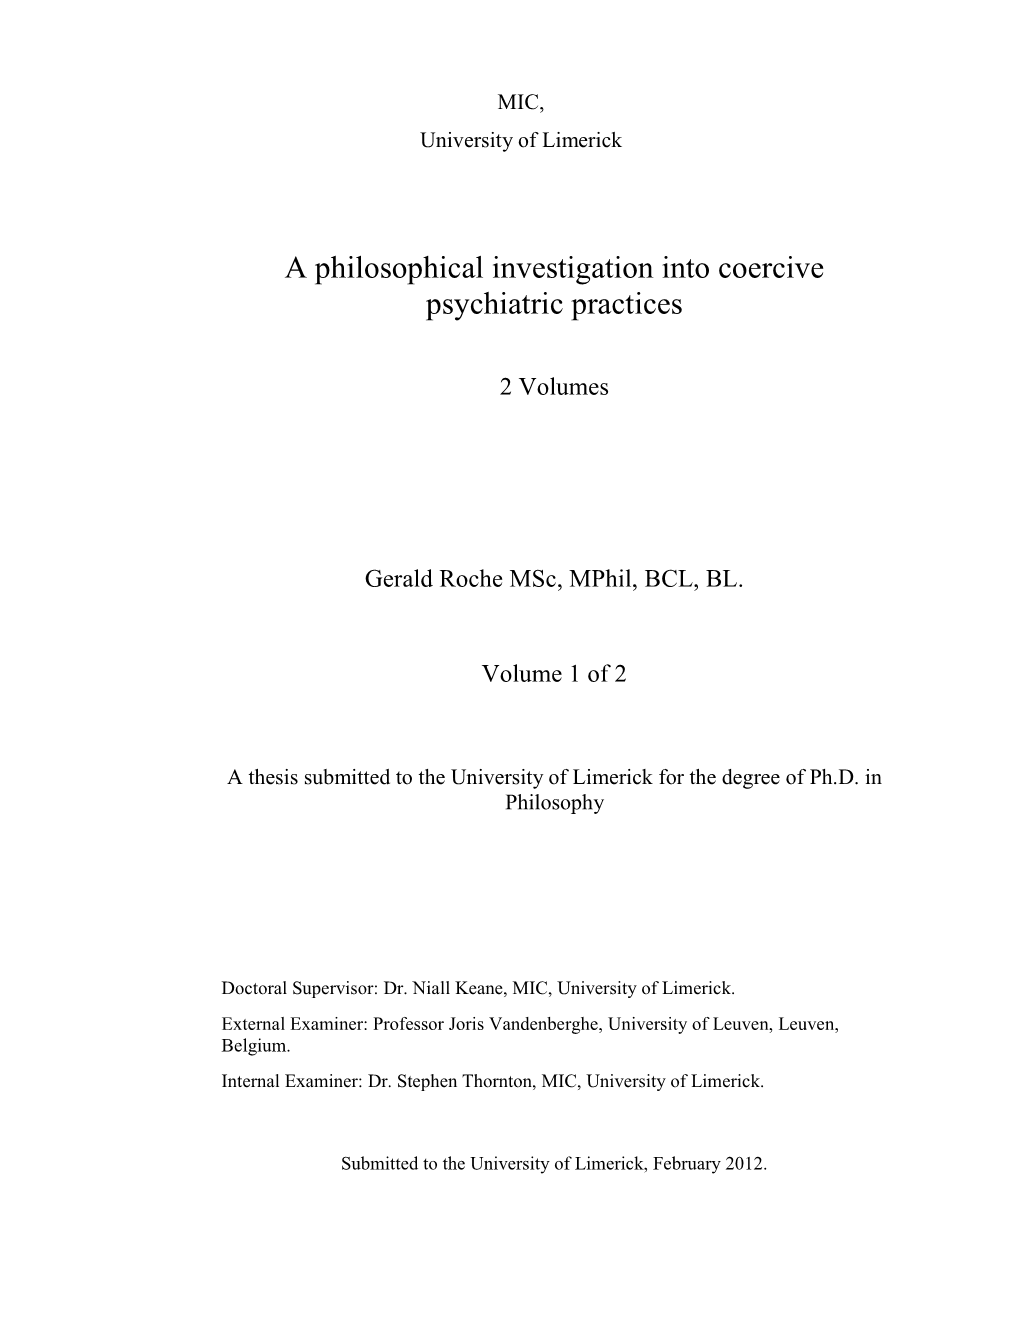 A Philosophical Investigation Into Coercive Psychiatric Practices